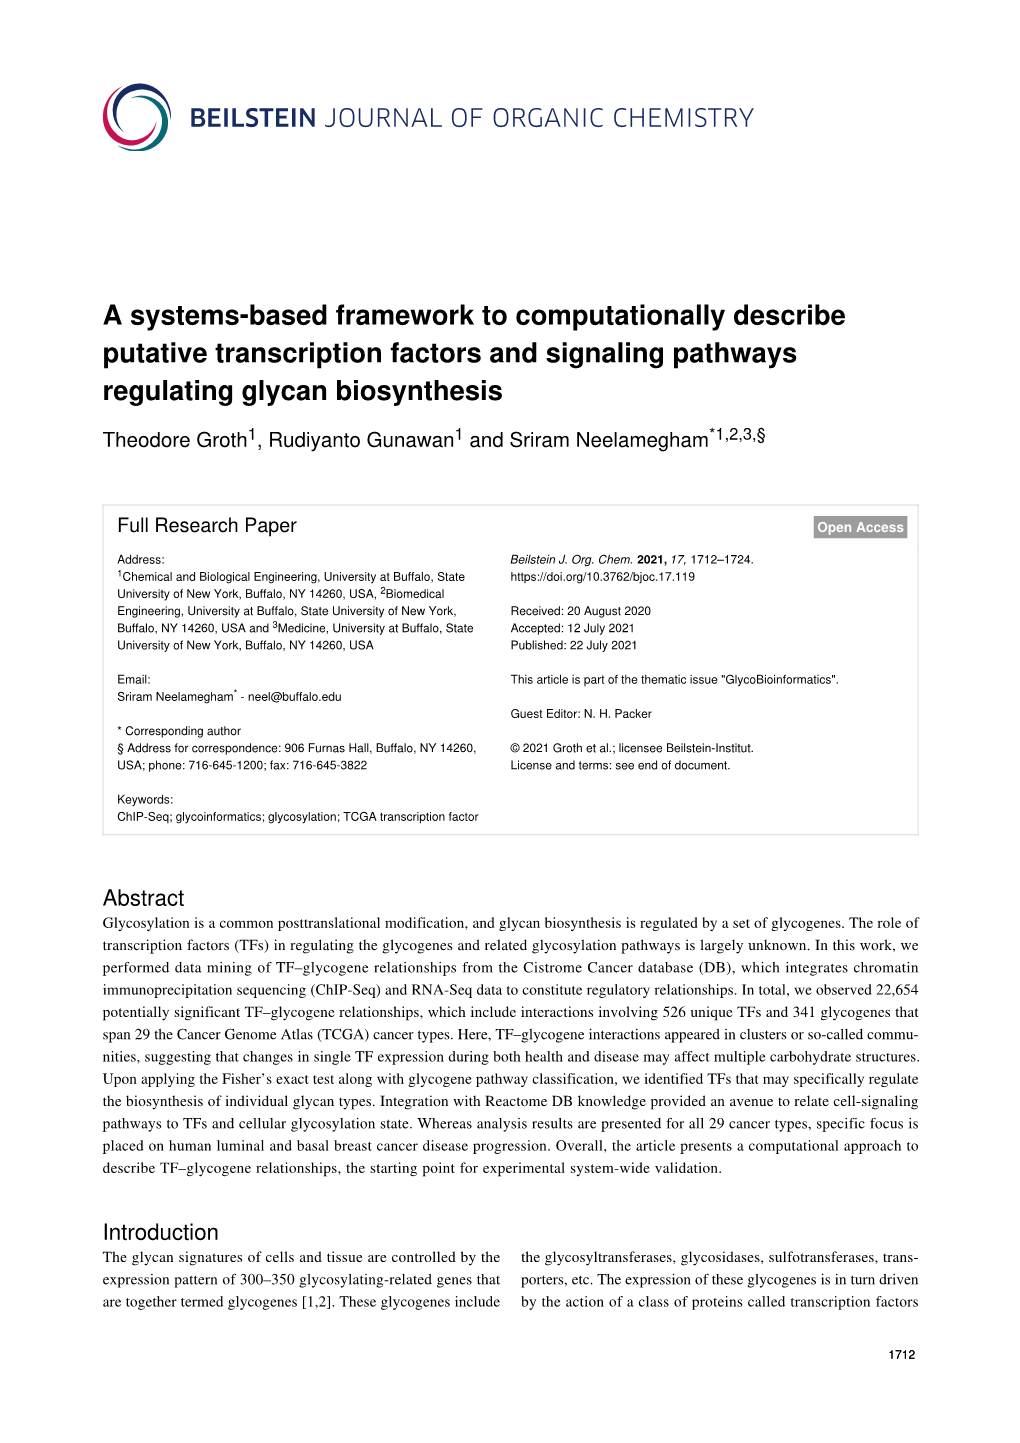 A Systems-Based Framework to Computationally Describe Putative Transcription Factors and Signaling Pathways Regulating Glycan Biosynthesis